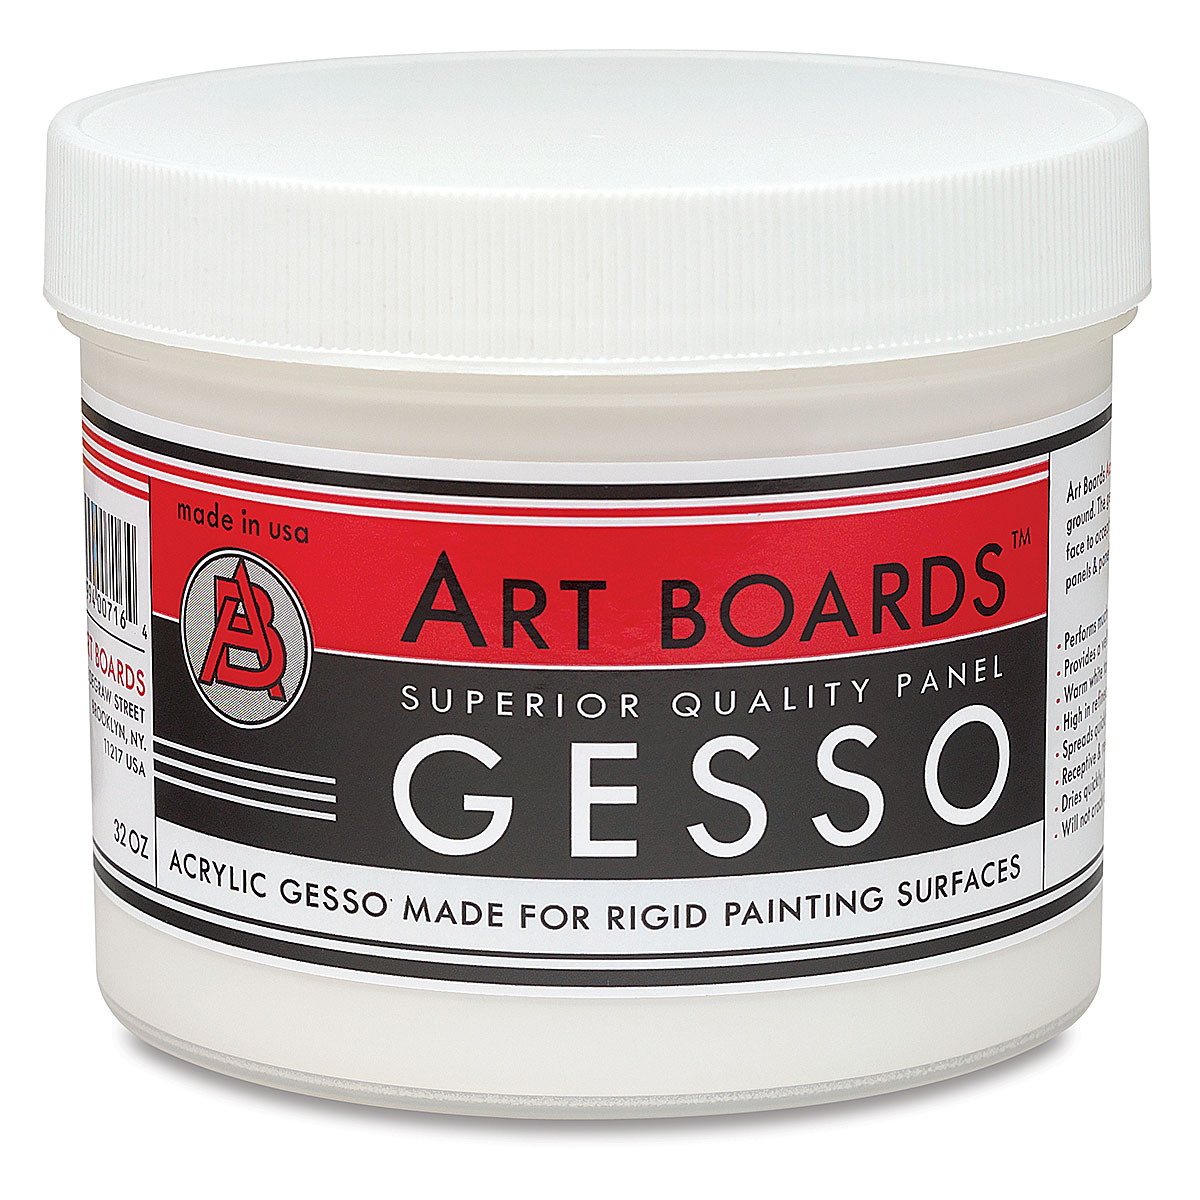 Art Boards Natural Gesso coated artist panels have solid edges and